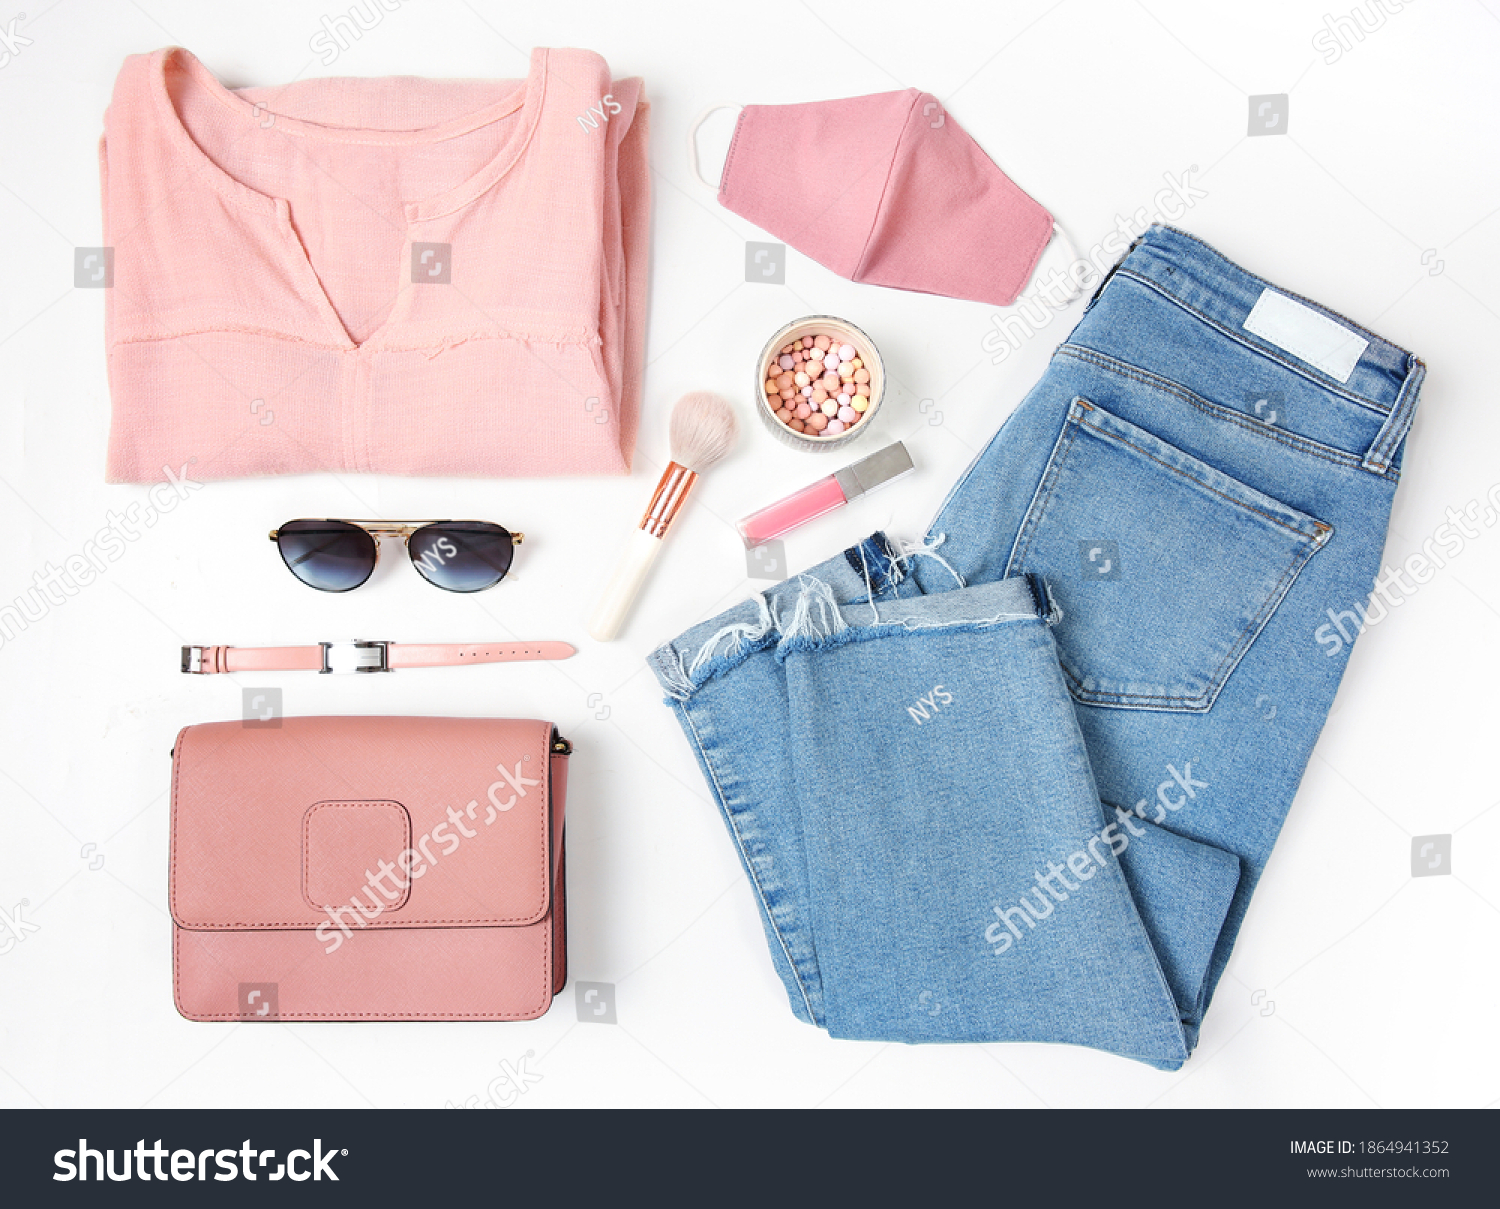 747,366 Fashion top view Stock Photos, Images & Photography | Shutterstock